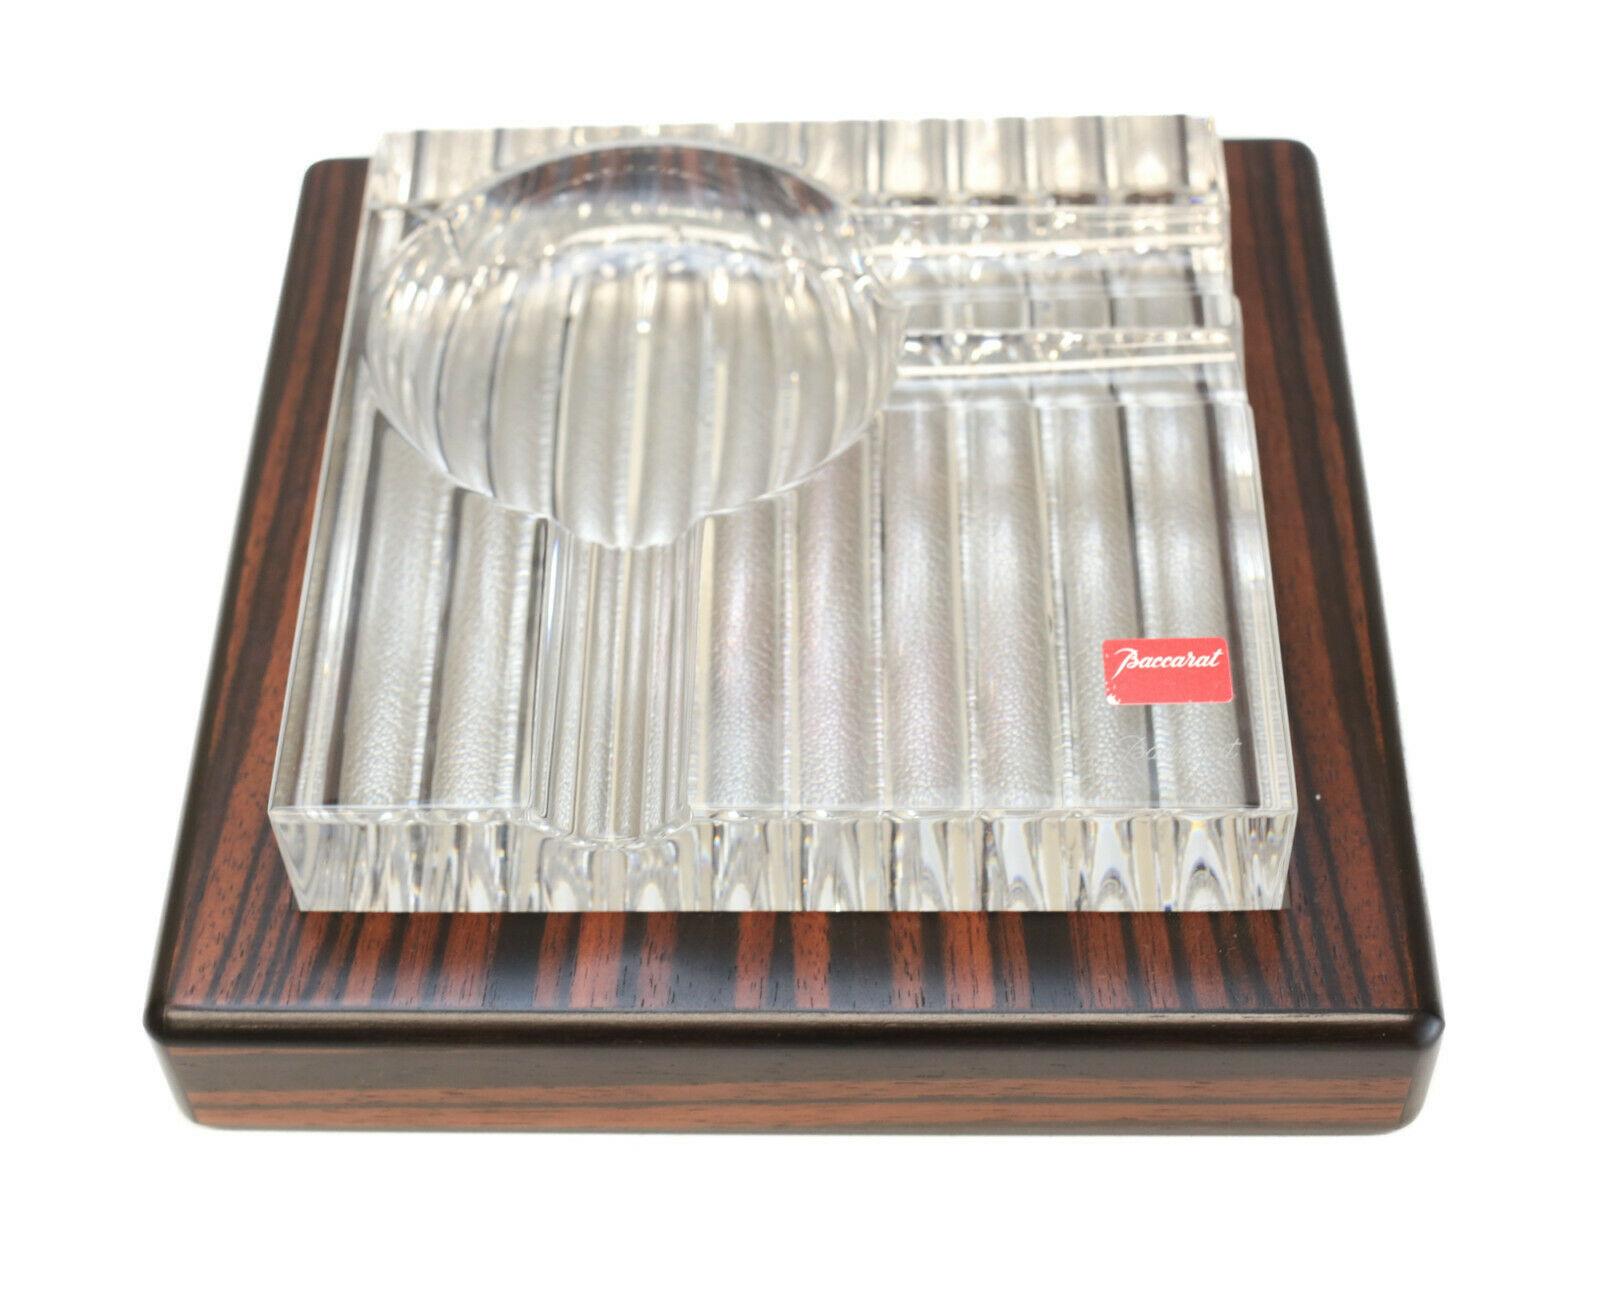 Baccarat Cut Glass and Striped Ebony Wood Ashtray in Havana In Good Condition For Sale In Pasadena, CA